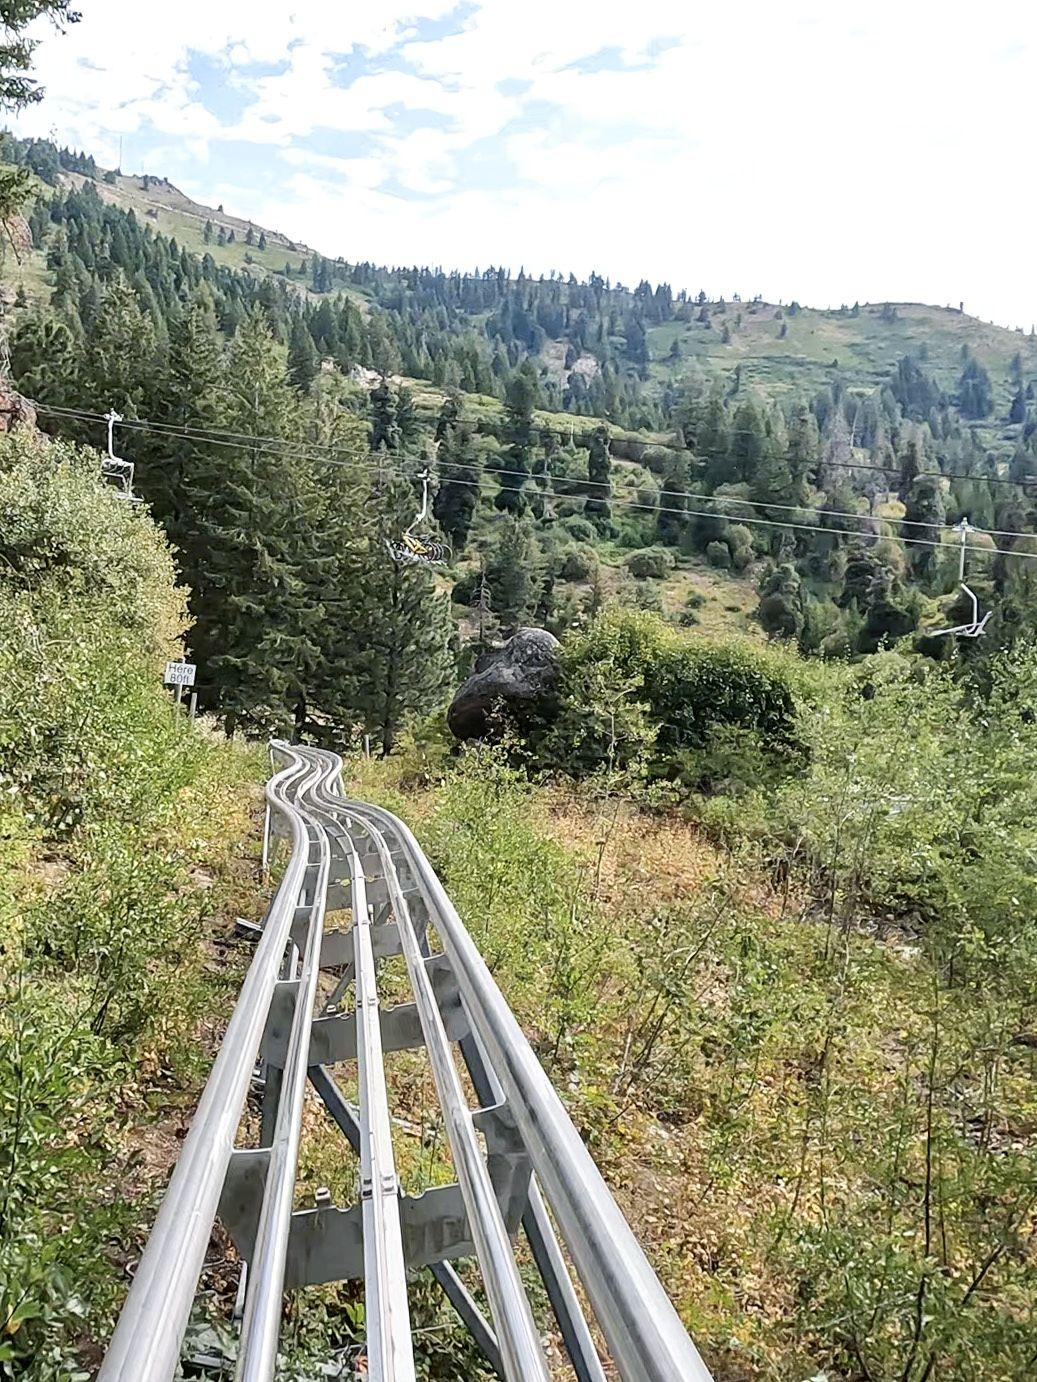 The Glade Runner alpine coaster tracks with a view of the mountains ahead.